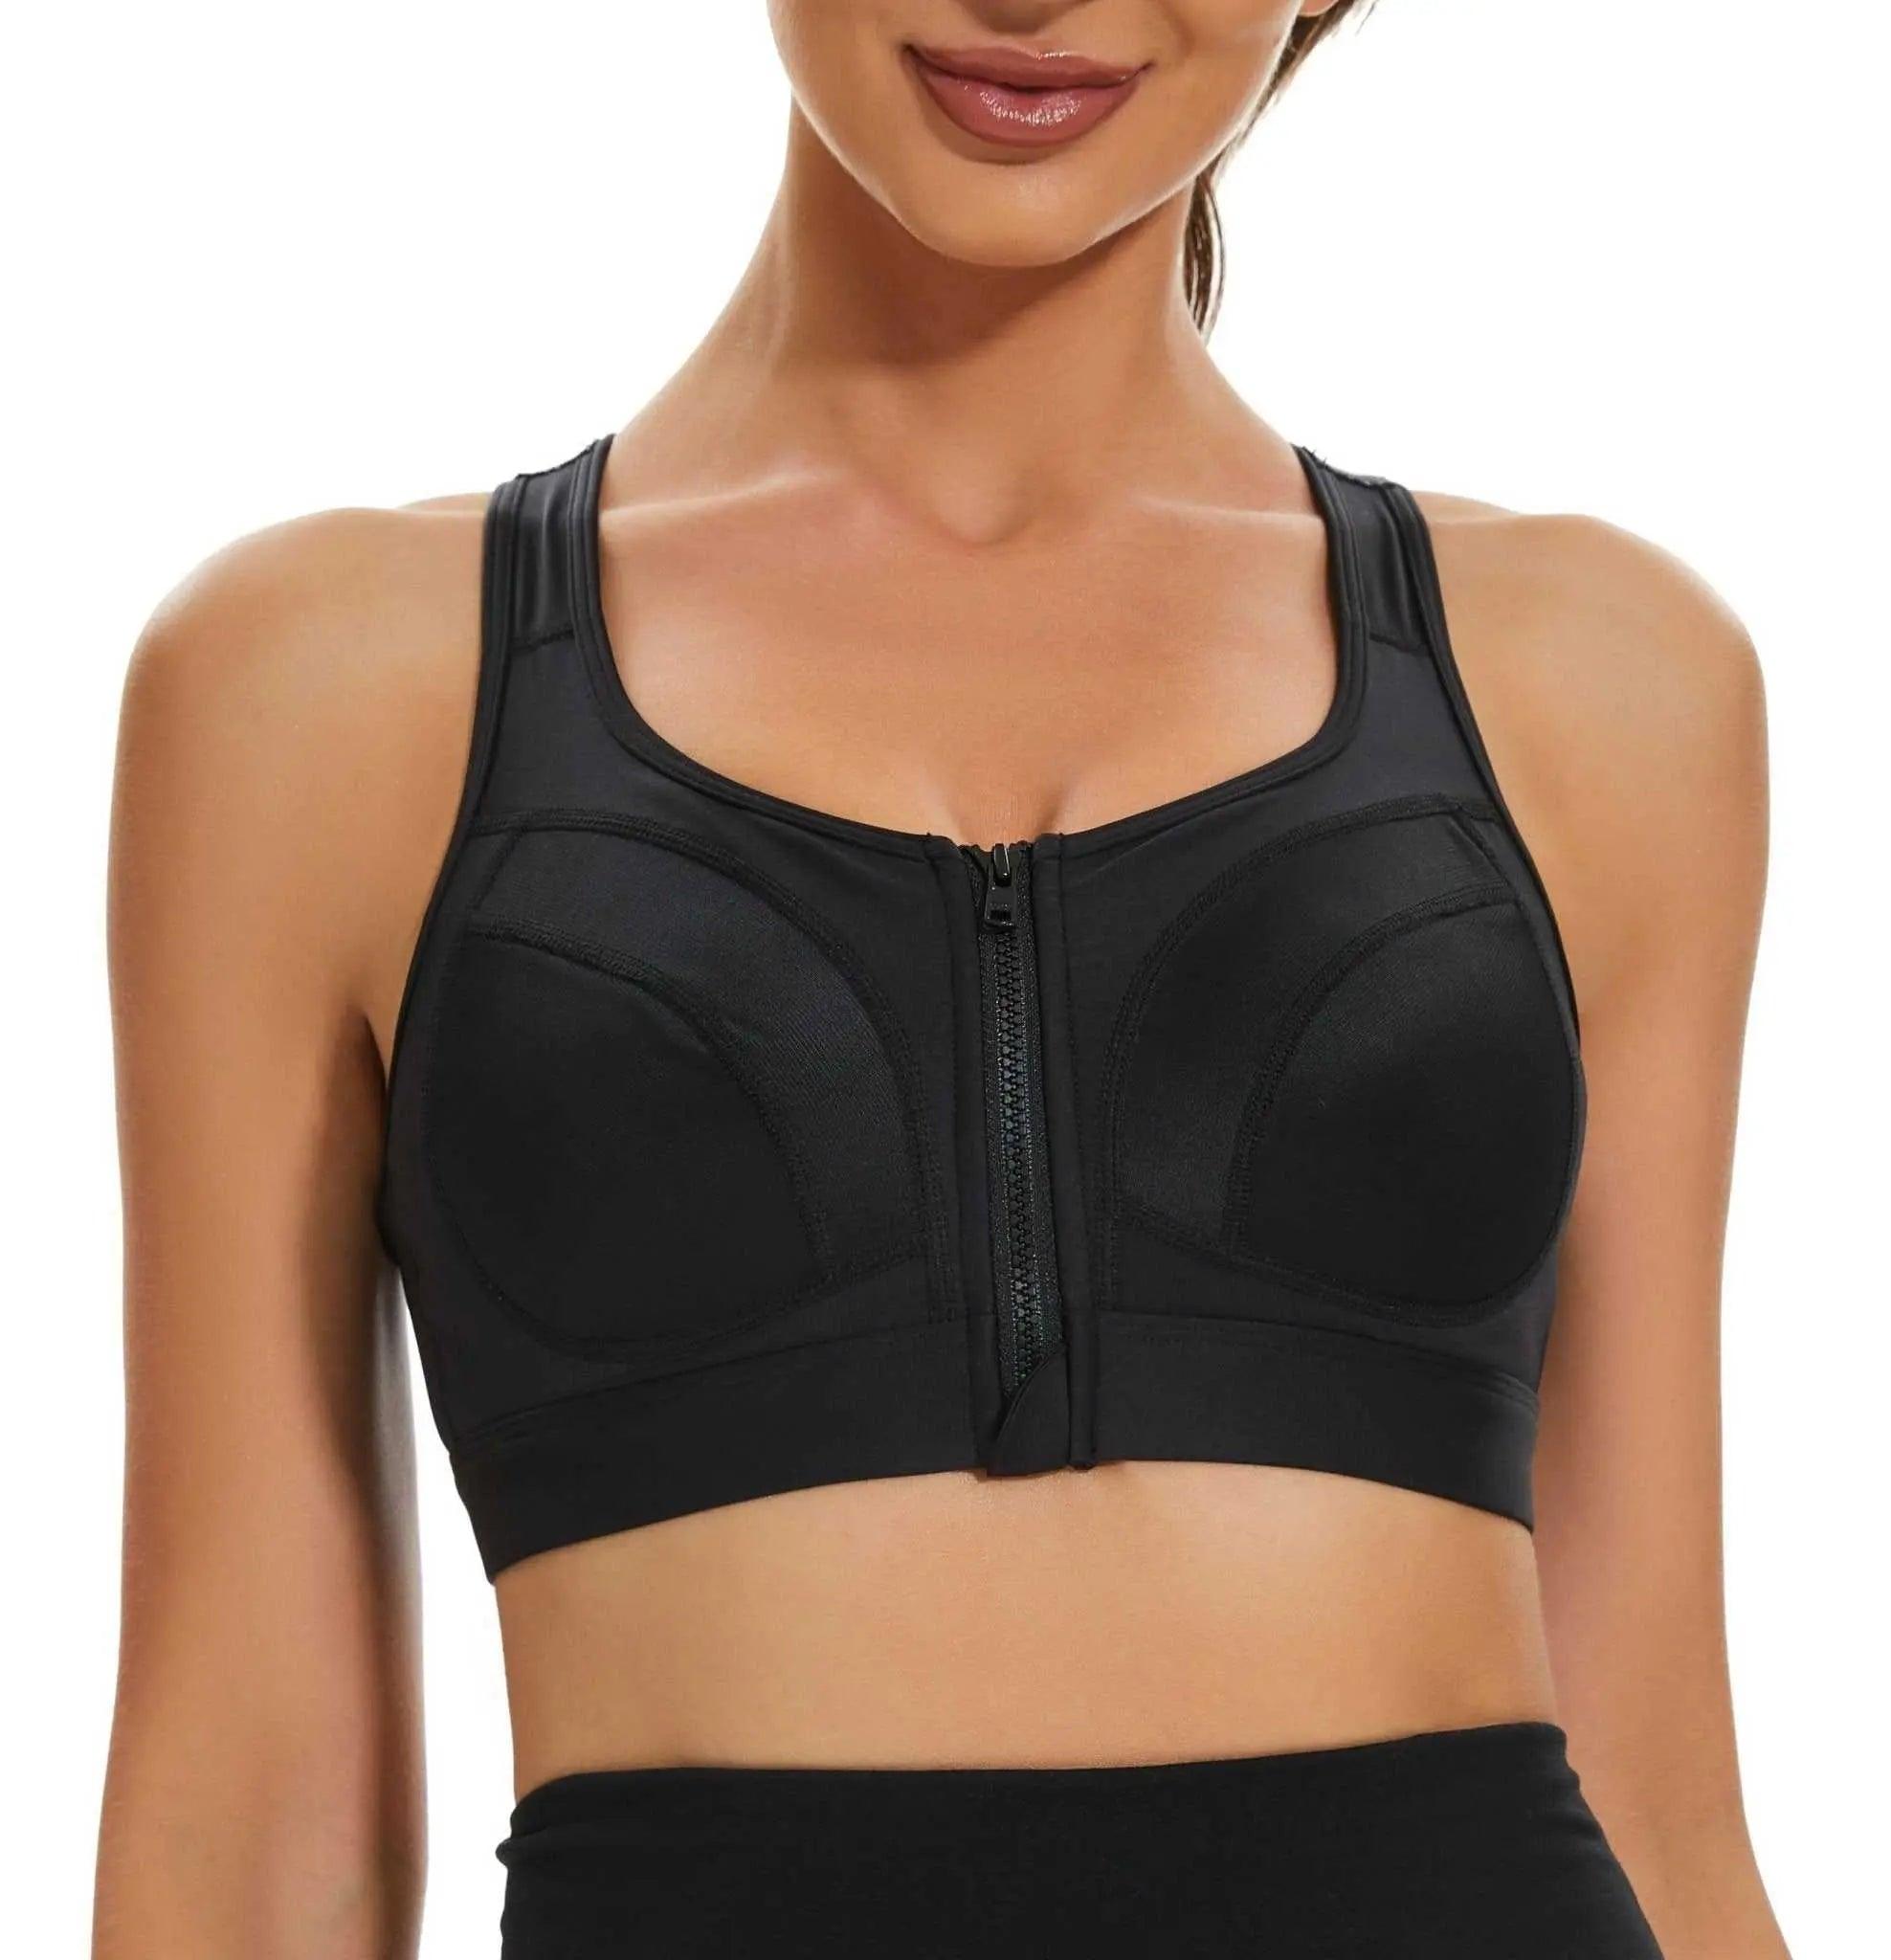 adviicd She Fit Sports Bras Women's Adjustable Shirred Front